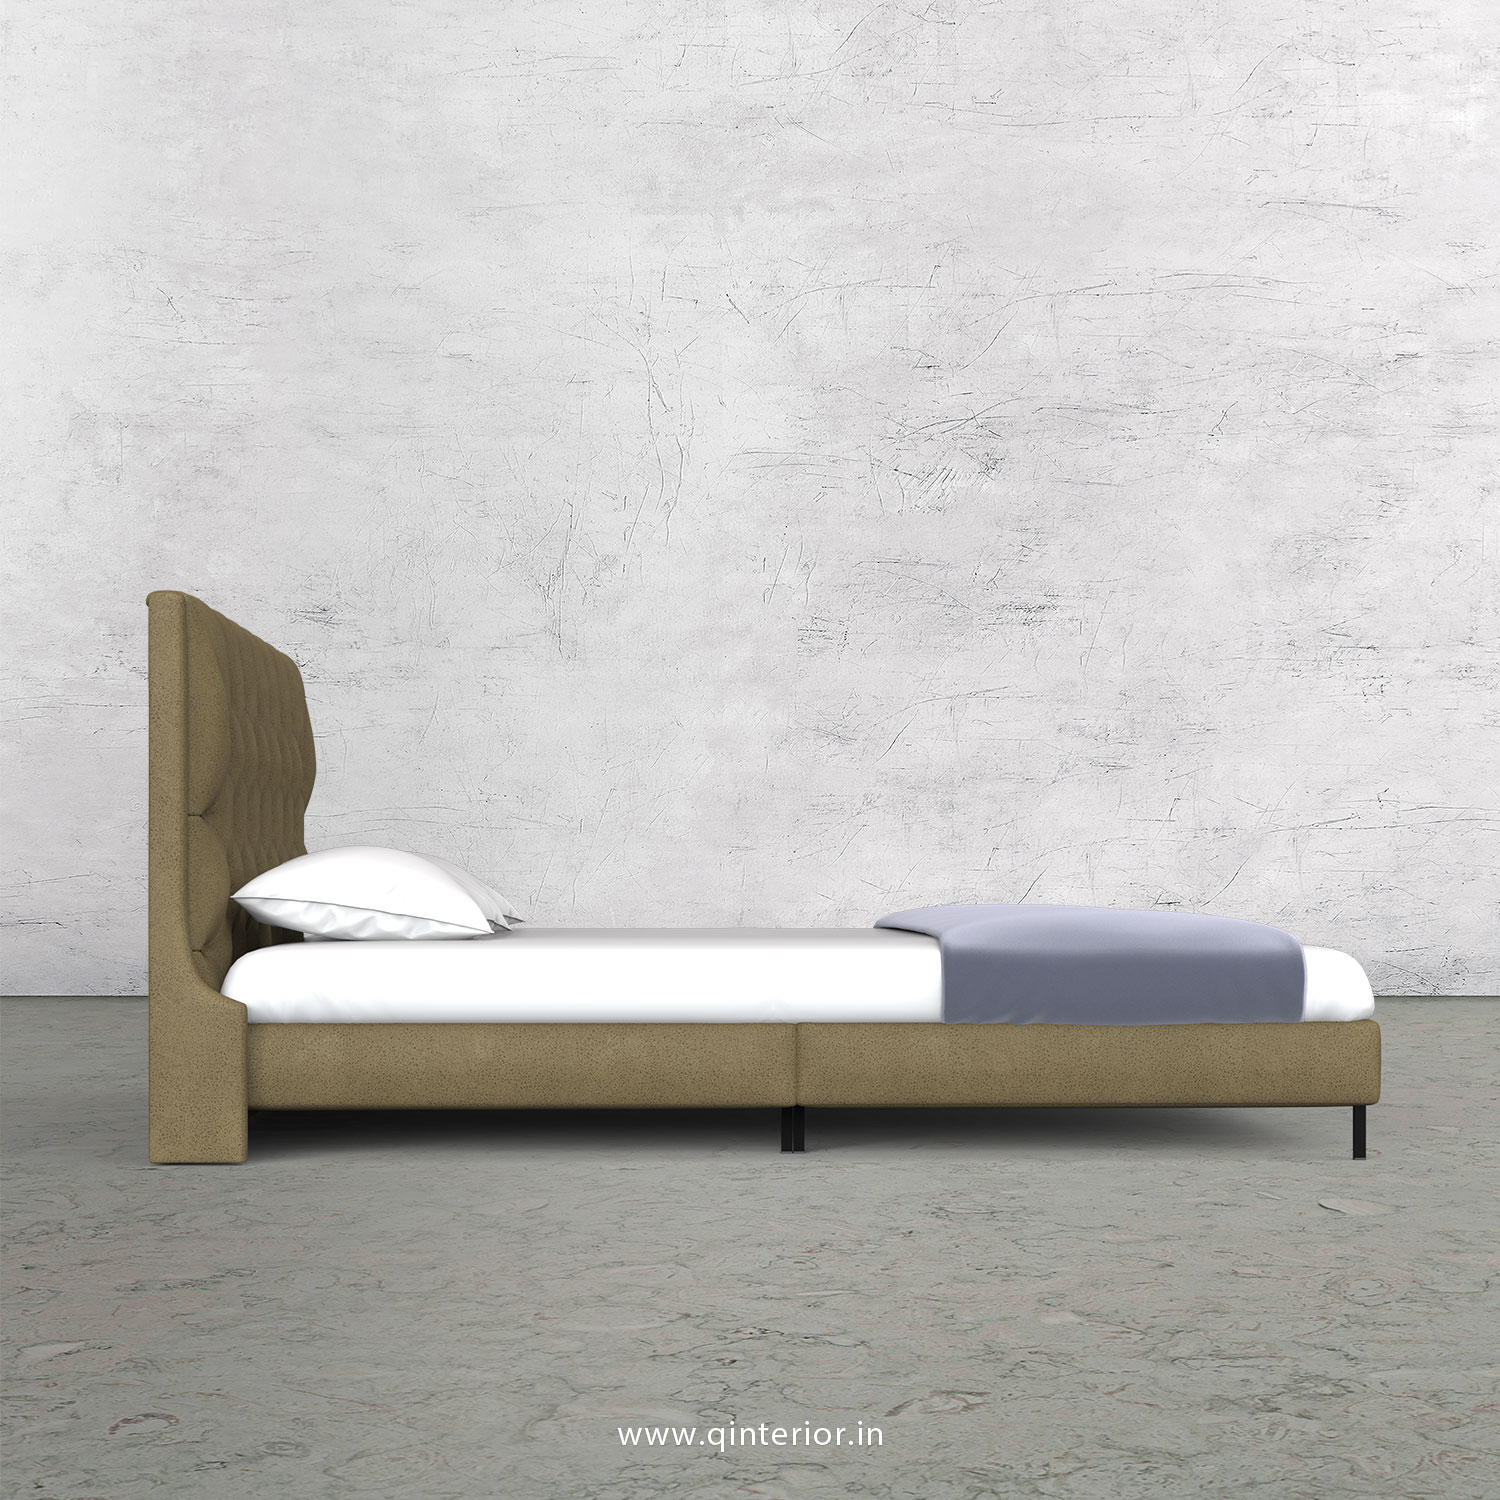 Scorpius King Size Bed in Fab Leather Fabric - KBD003 FL01